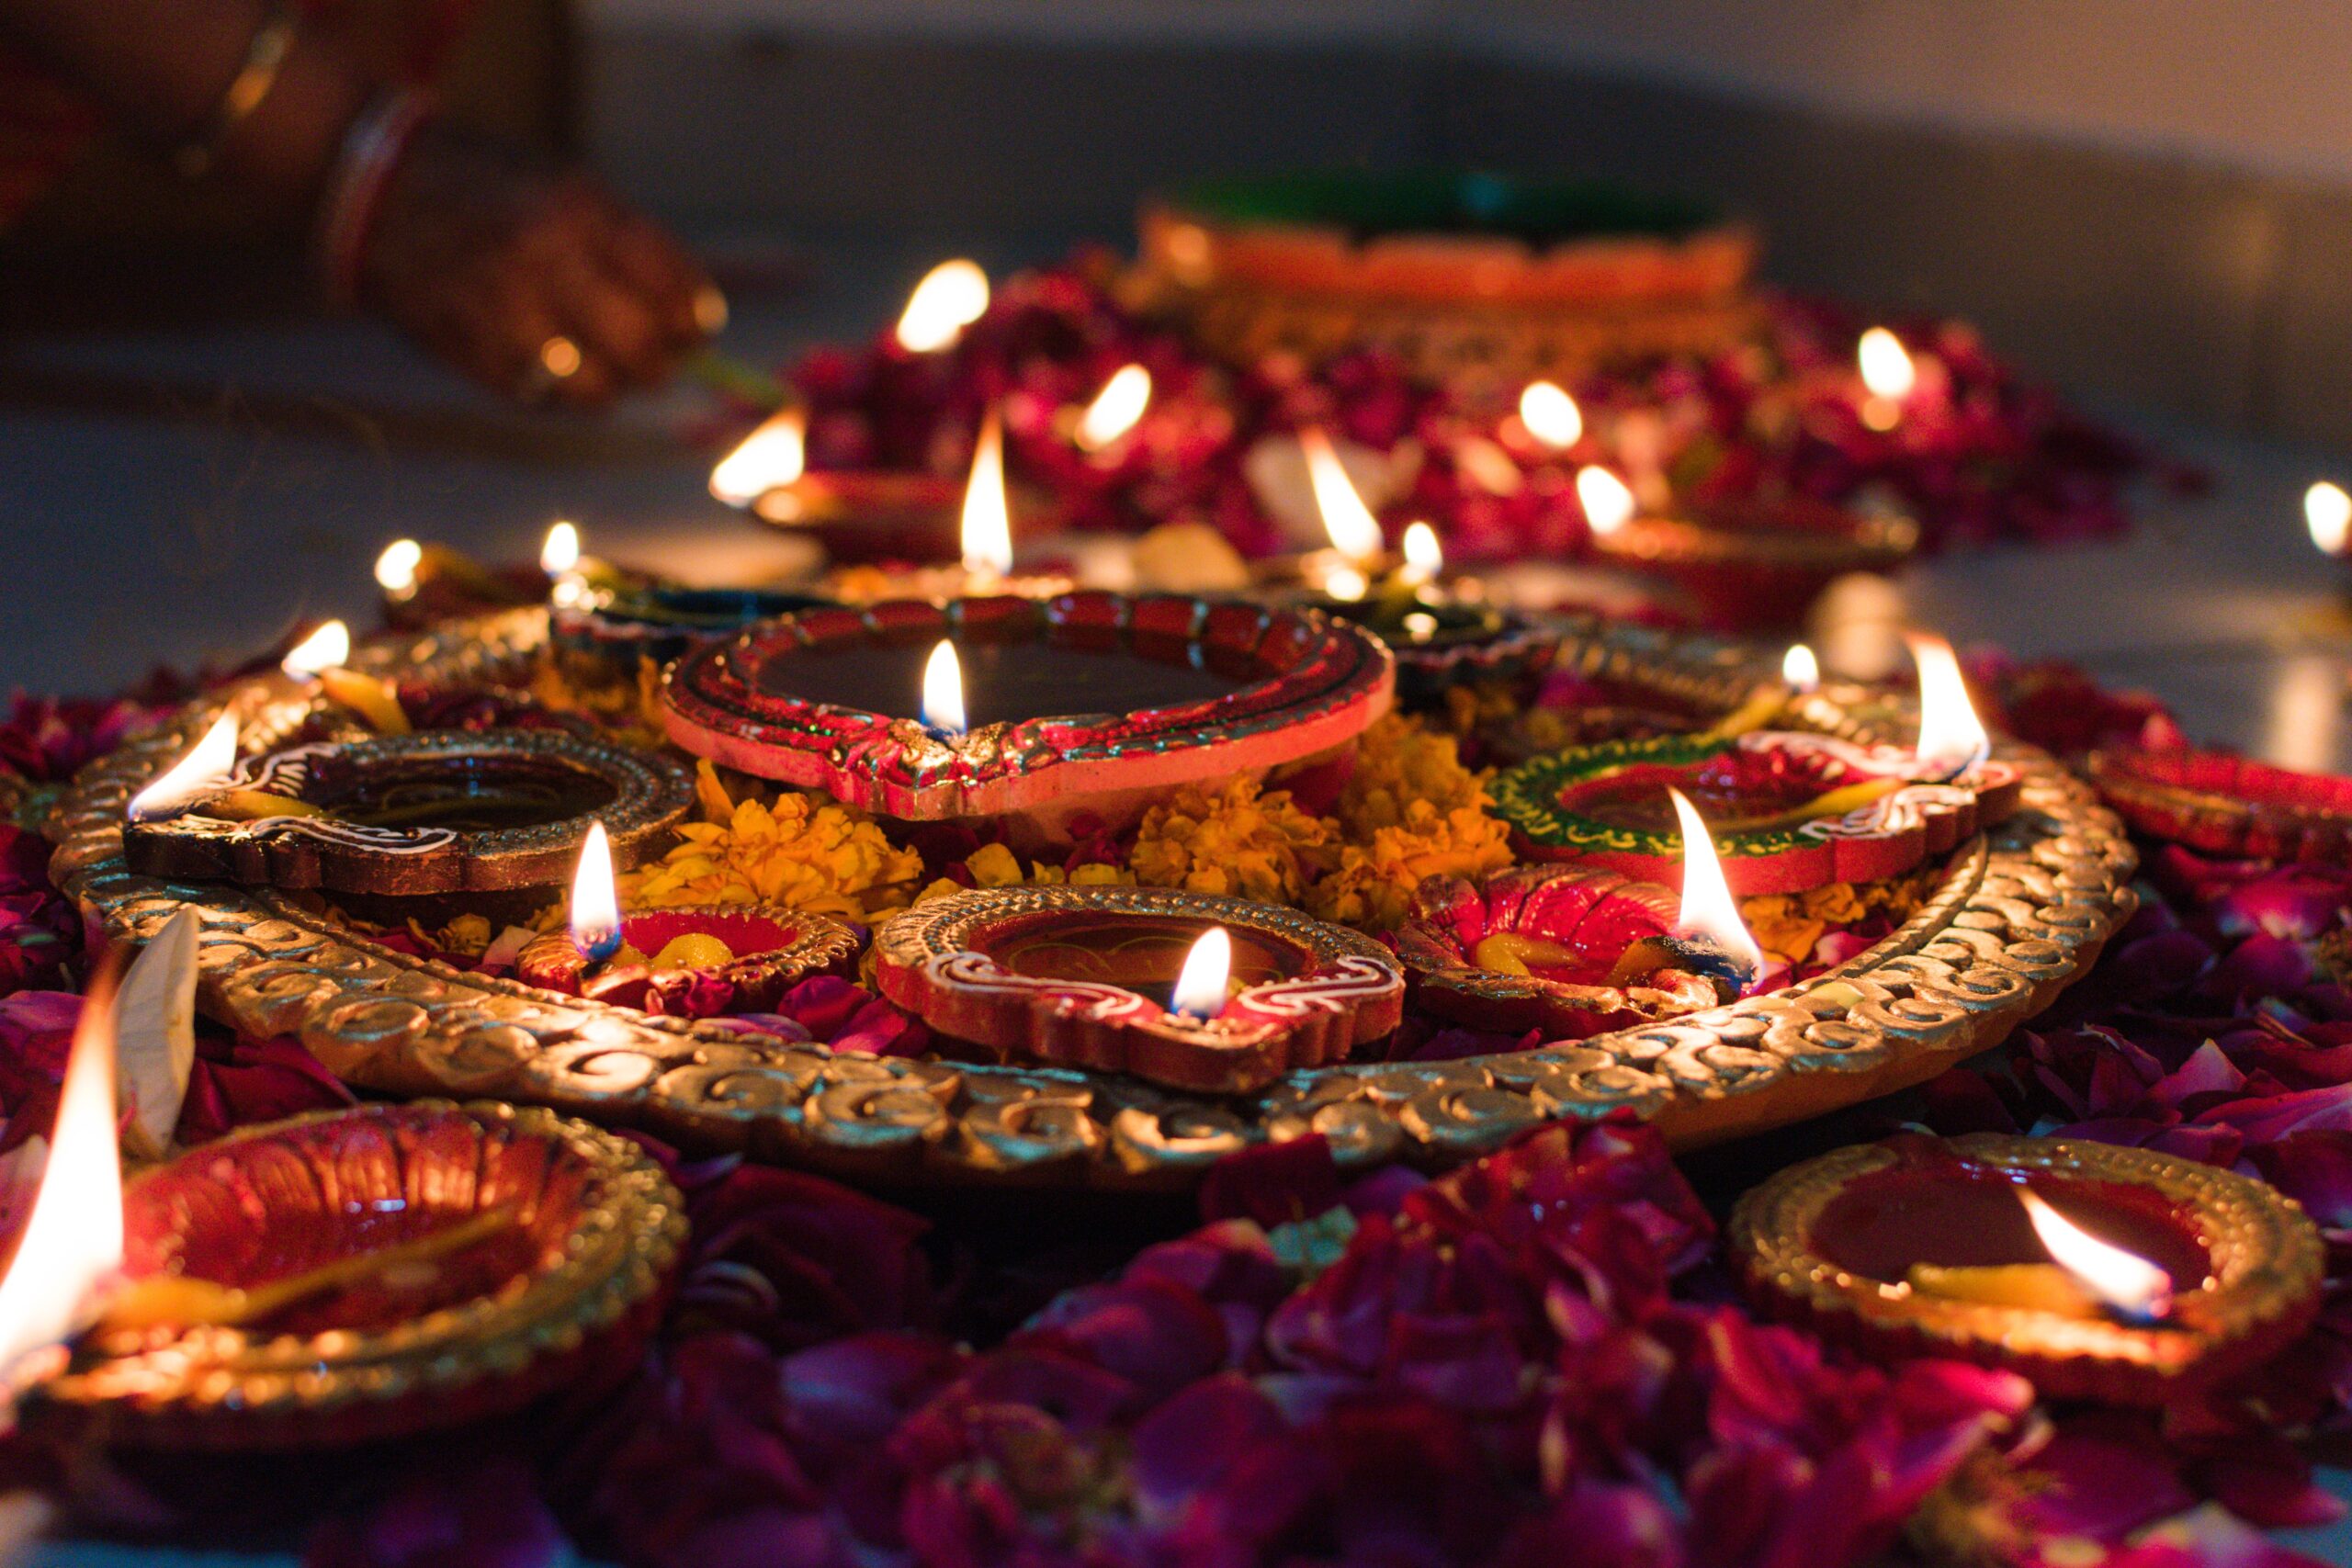 A photo of many diyas (candle holders) lit, a sea of flames for Diwali festivities.